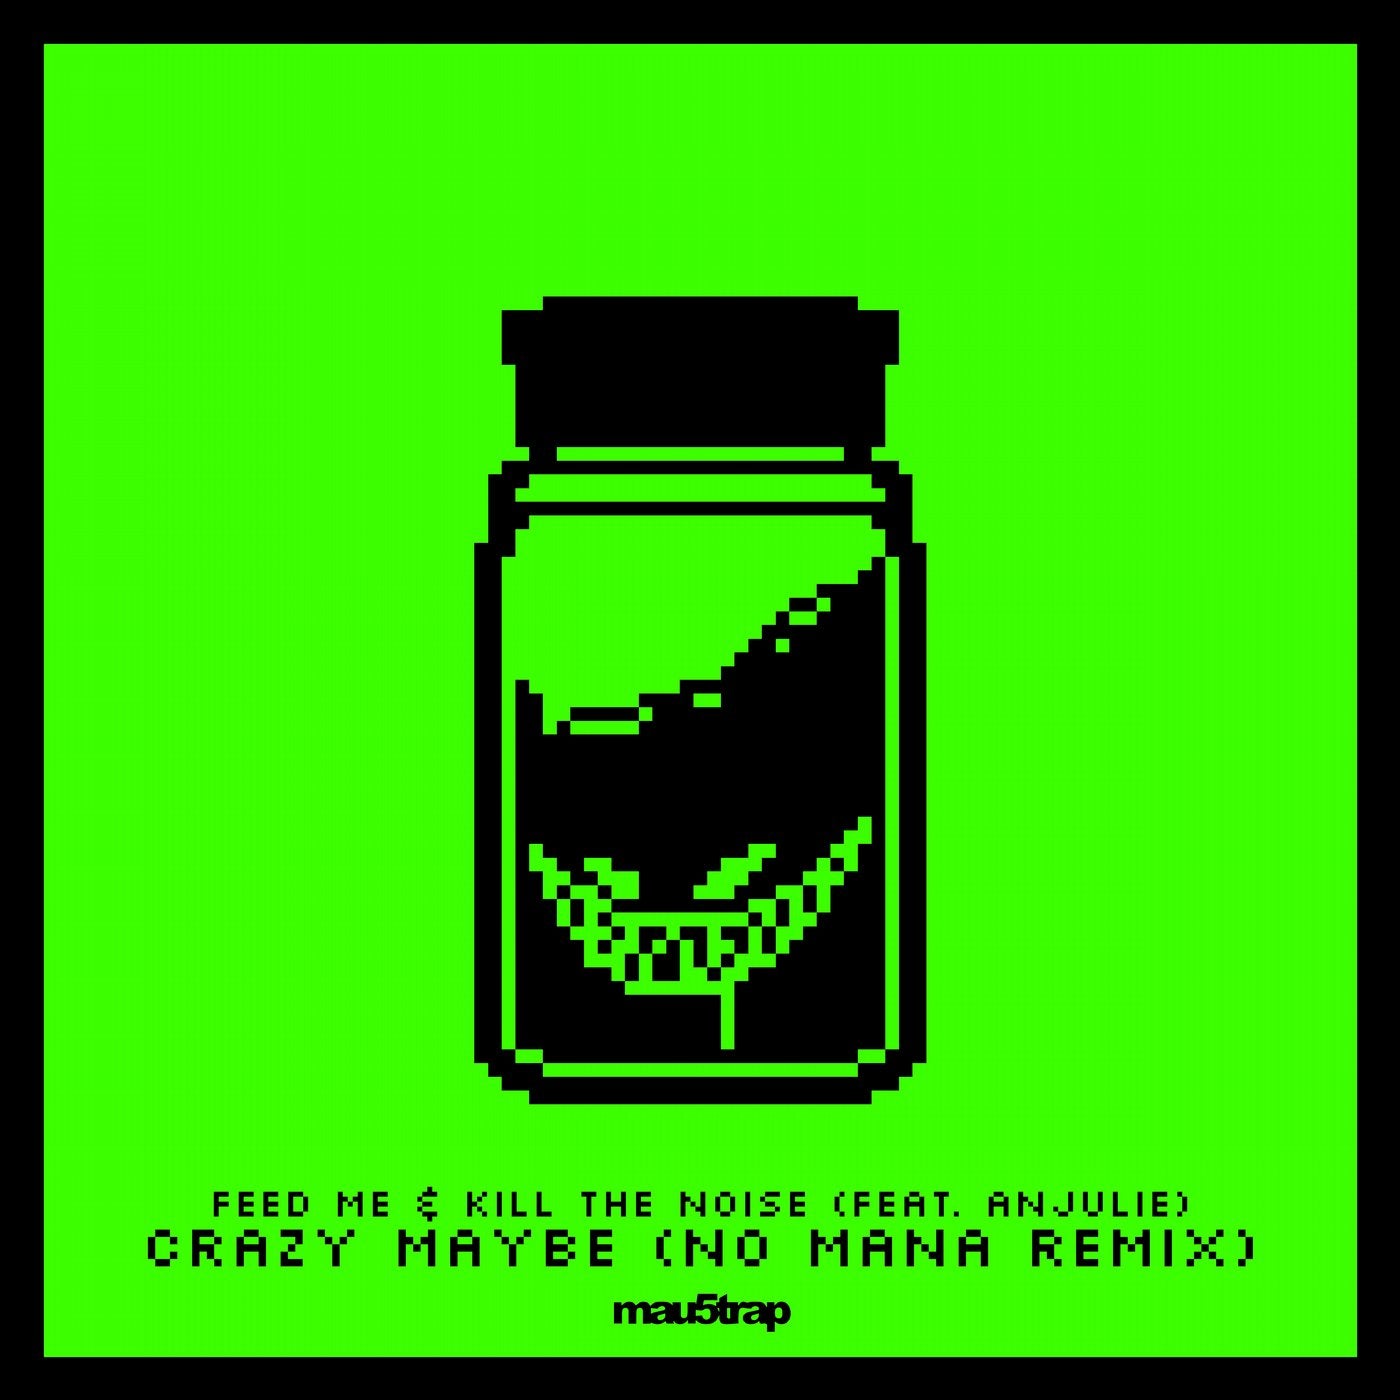 Crazy Maybe (No Mana Remix) feat. Anjulie